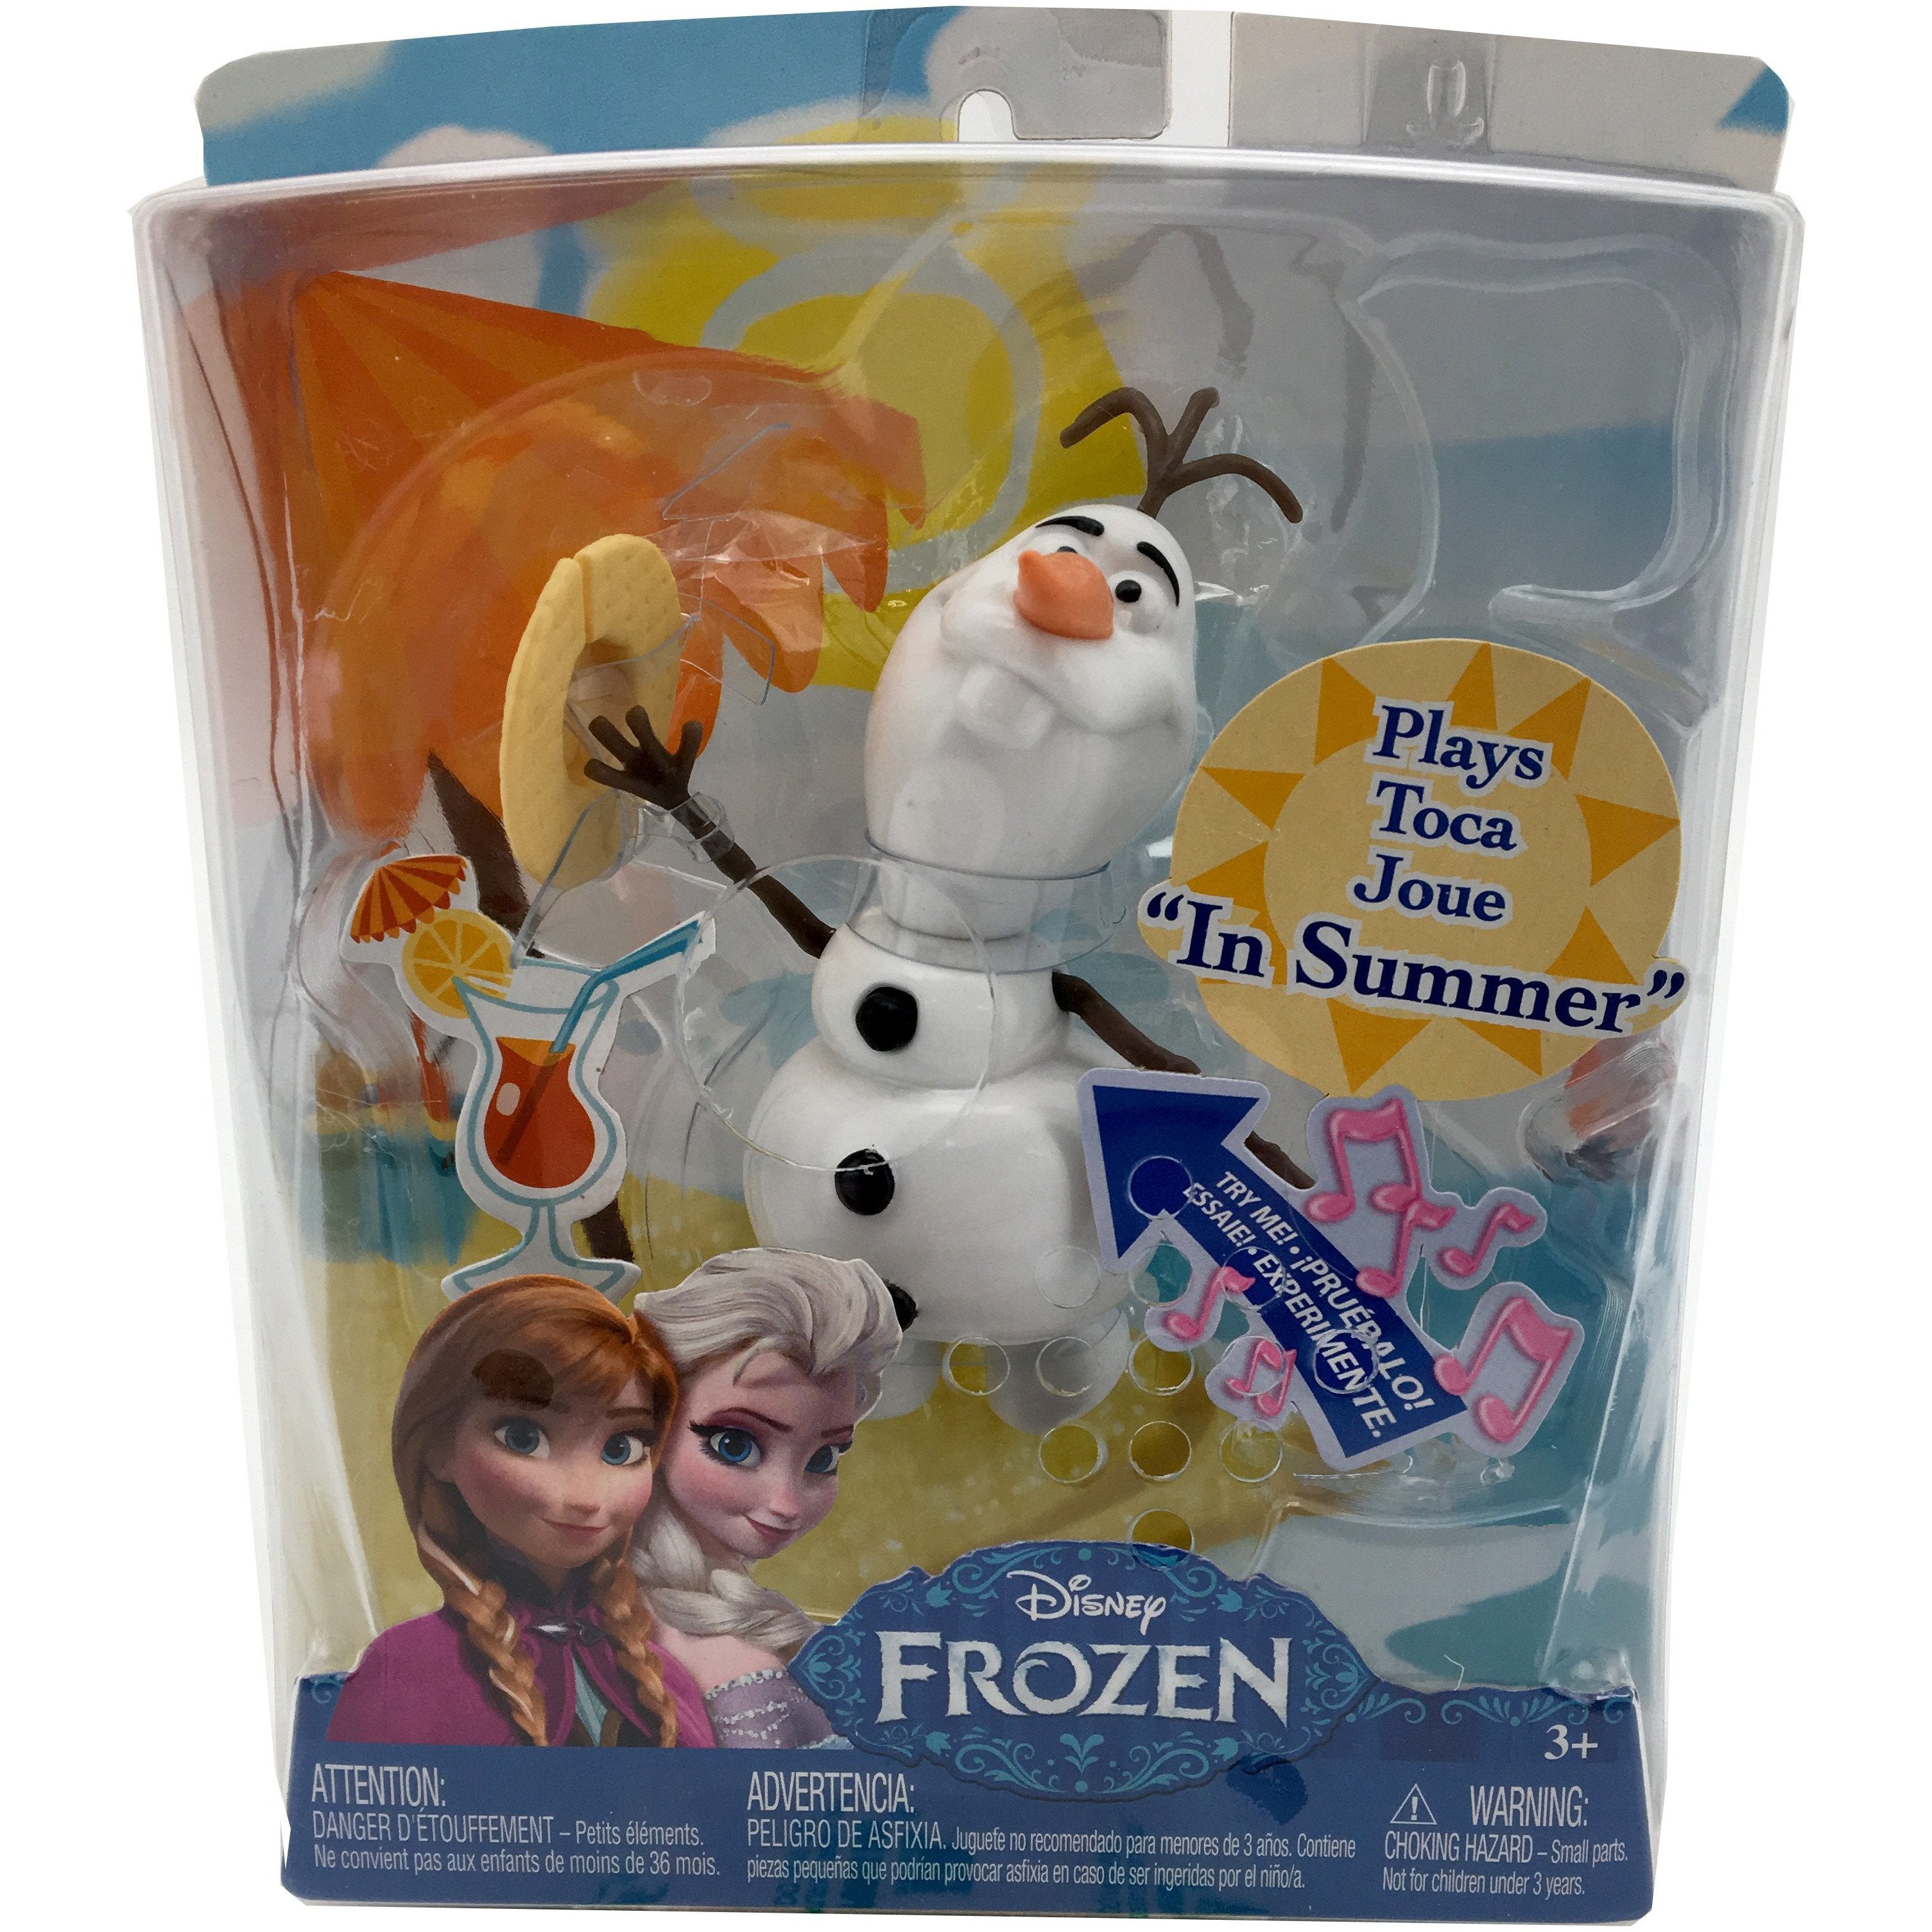 Disney's Frozen Singing Olaf Action Figure / Singing Toy / Musical Toy **DEALS**